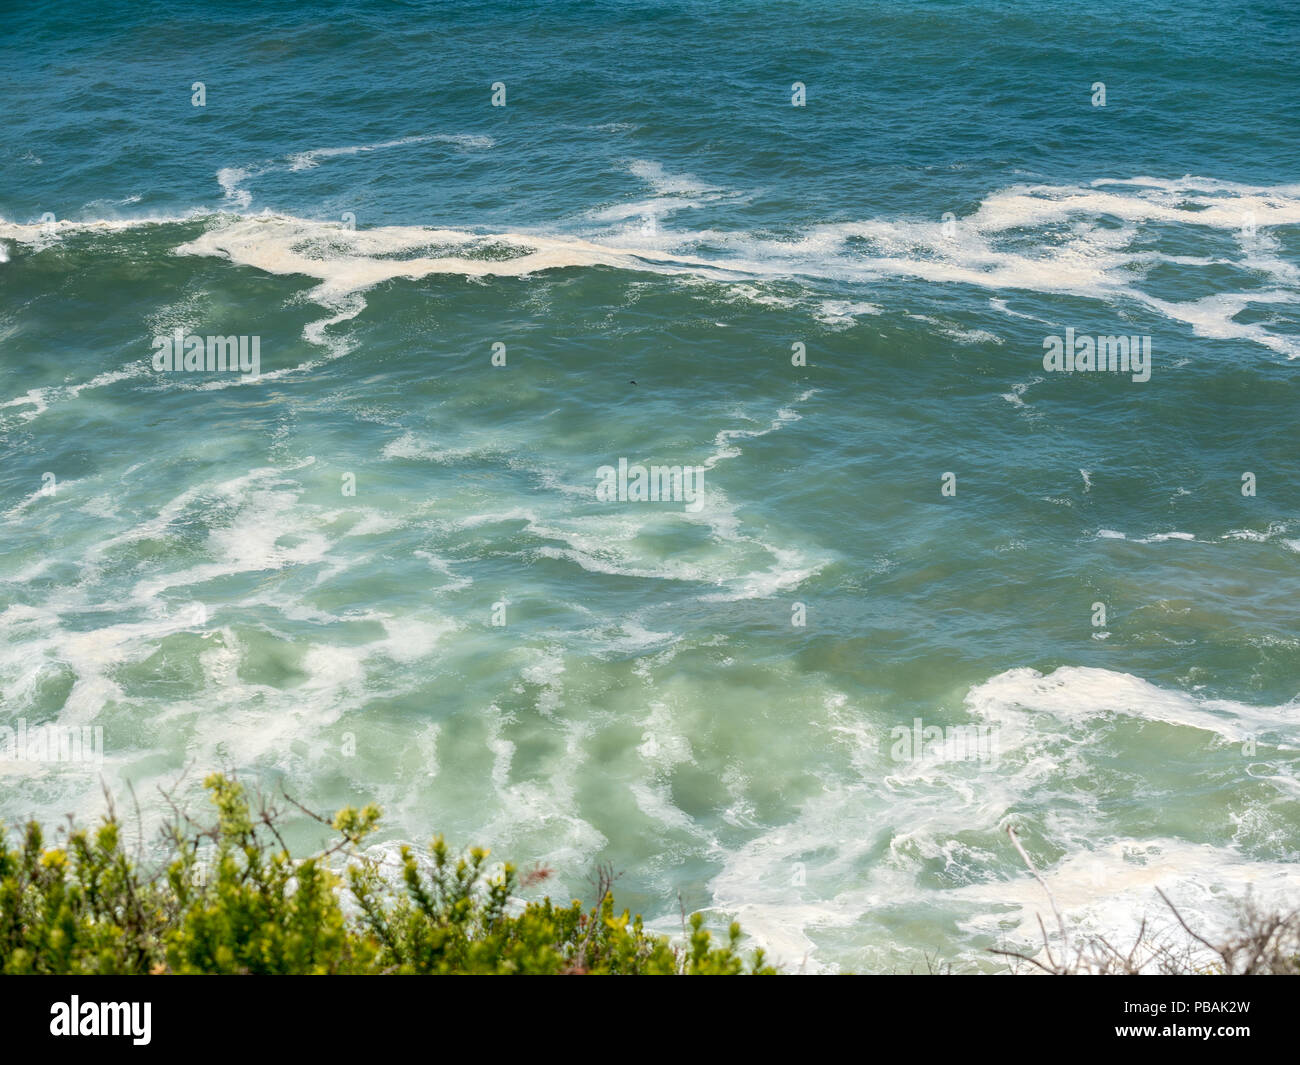 Crashing waves at Featherbed Nature reserve in South Africa. Stock Photo